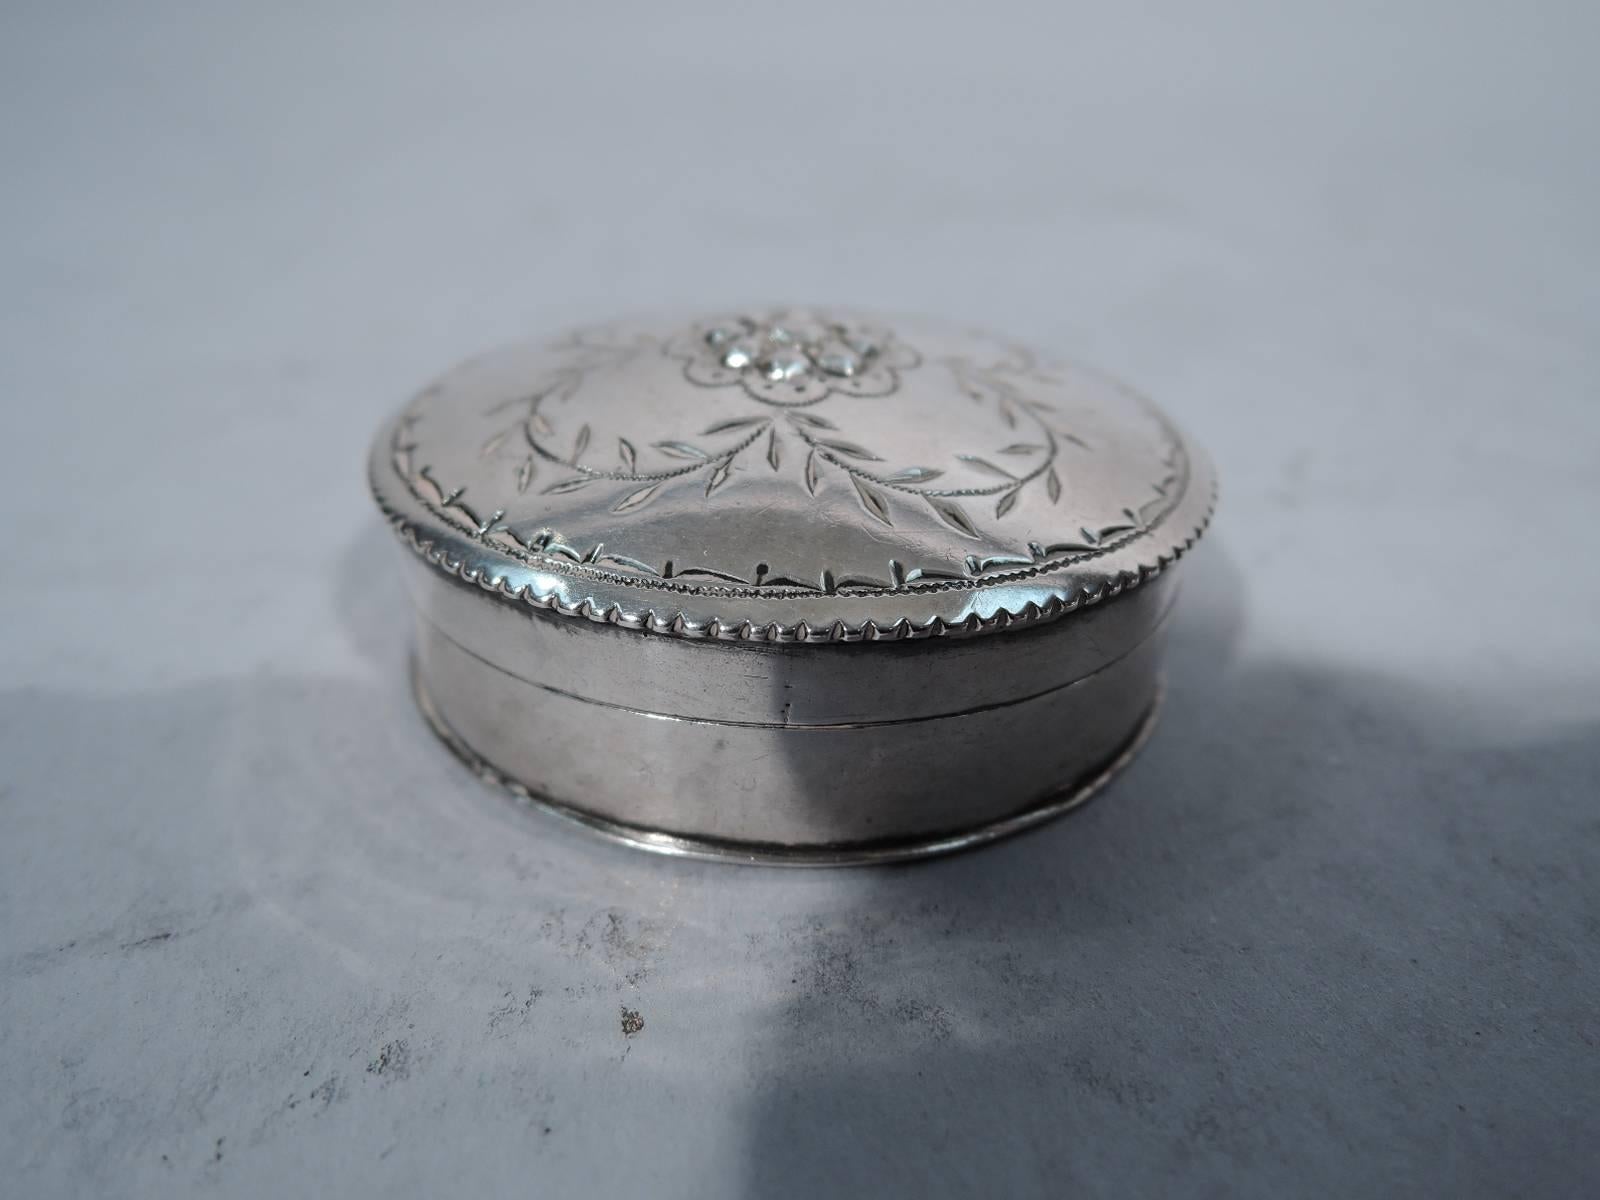 Beautiful German silver box, 18th century. Oval with scalloped rim. Cover has scalloped rim and engraved quatrefoil leaf garland with central low-relief flower. Fully hallmarked on box underside. Excellent condition.

Dimensions: H 3/4 x W 1 3/4 x